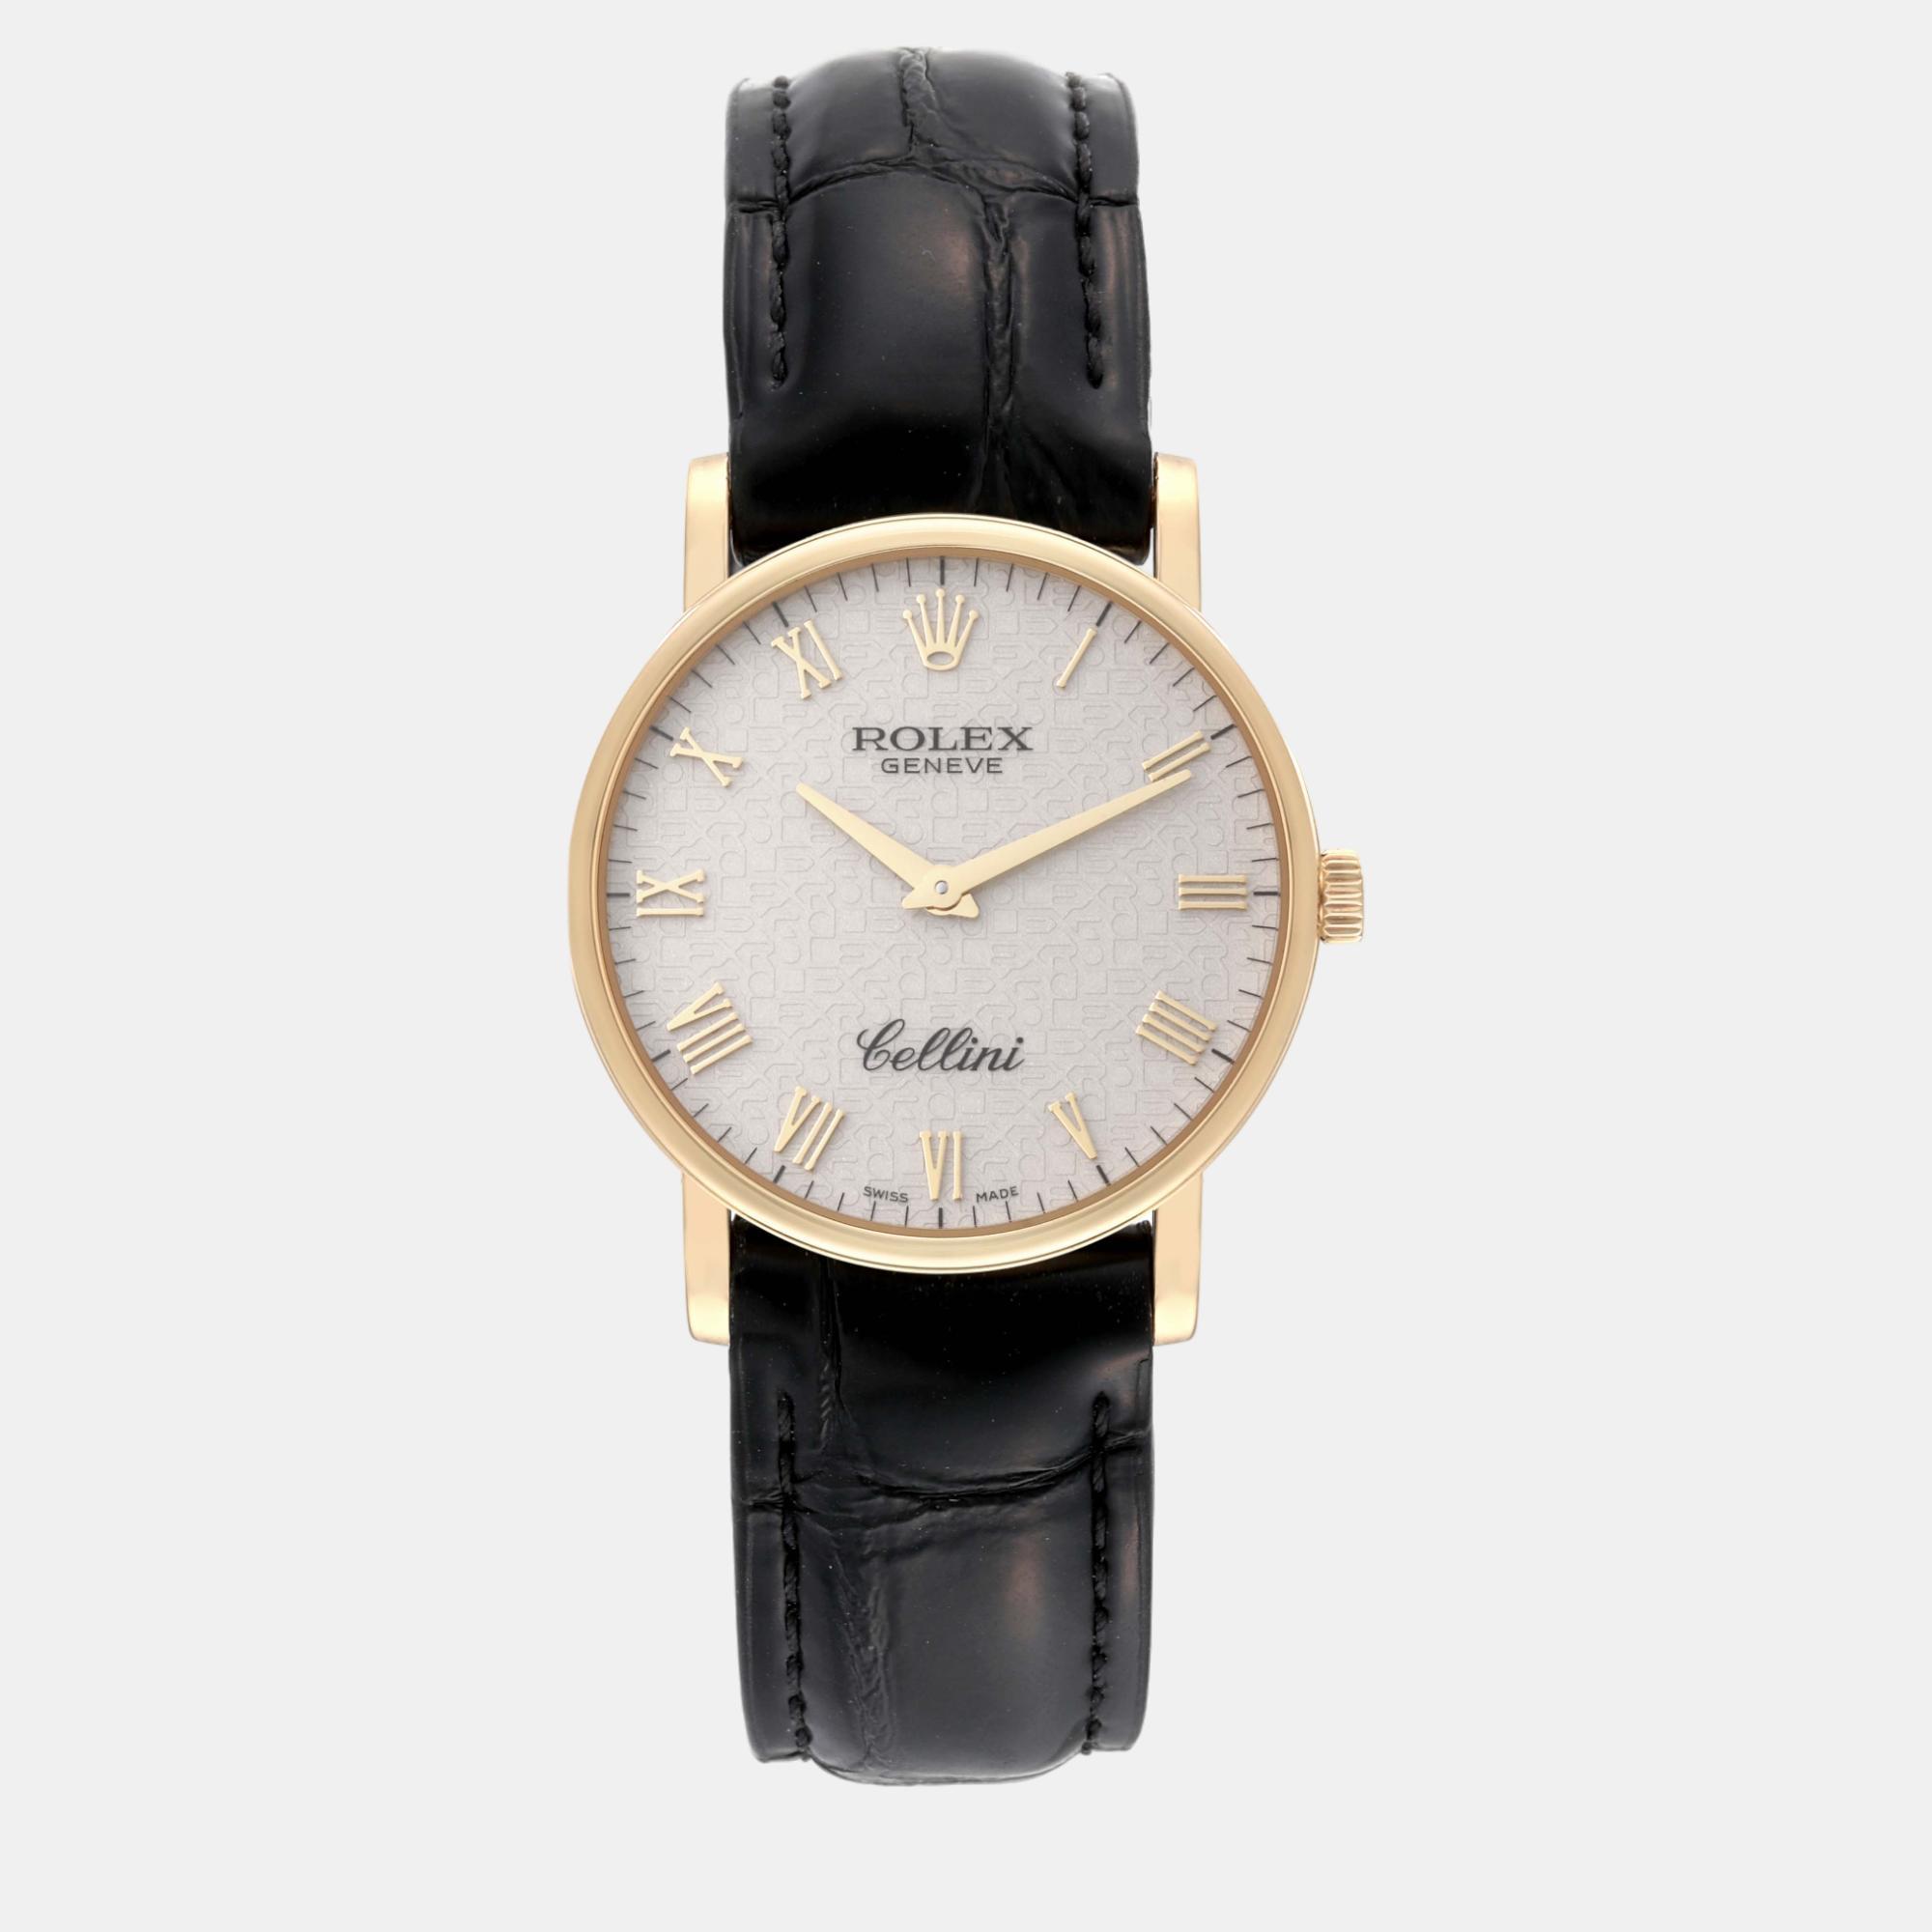 Rolex cellini classic yellow gold ivory anniversary dial men's watch 32 mm